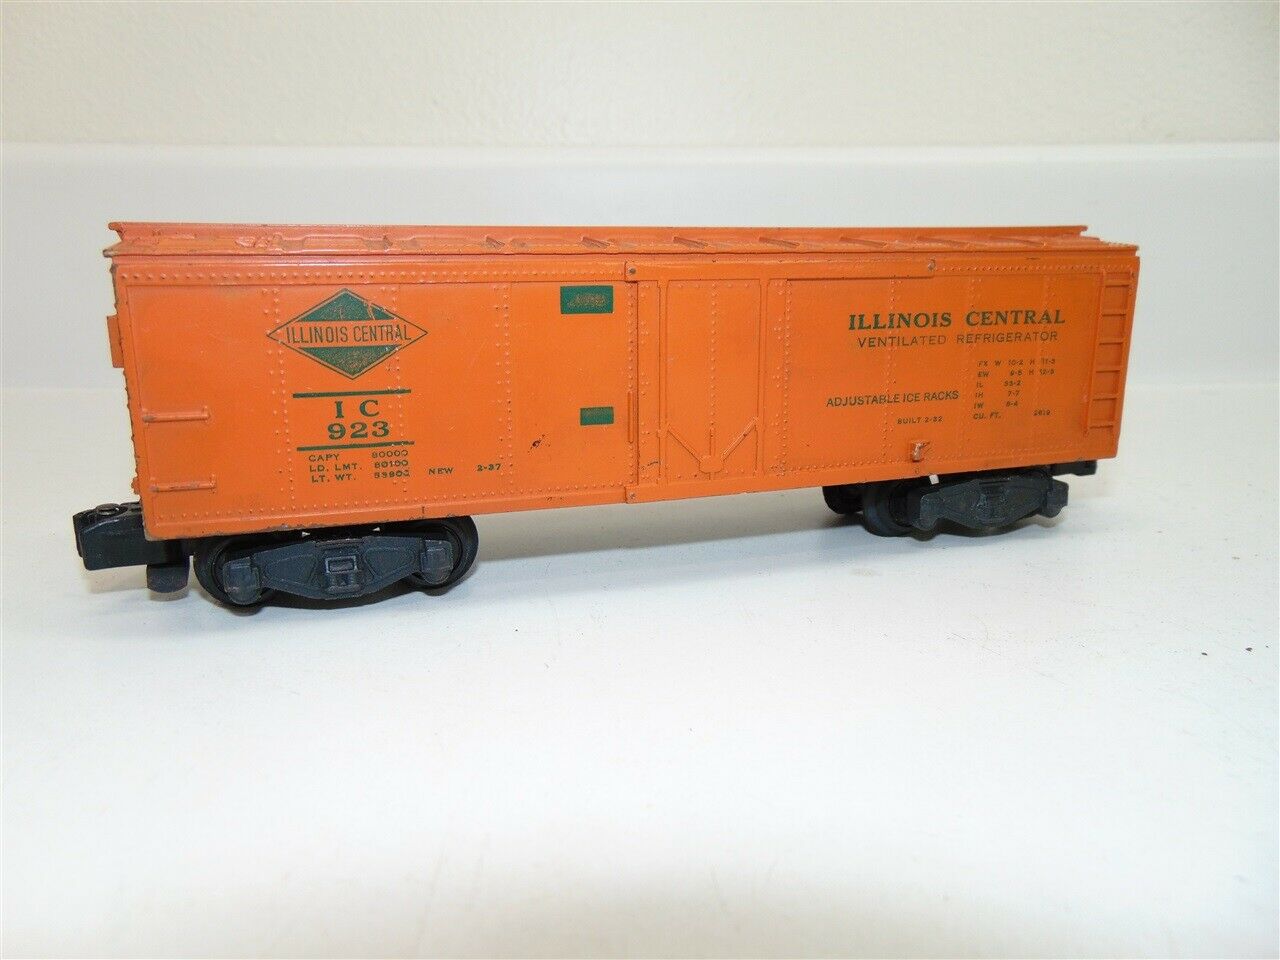 Vintage American Flyer AC Gilbert S Scale Illinois Central #923 Refrigerator Car